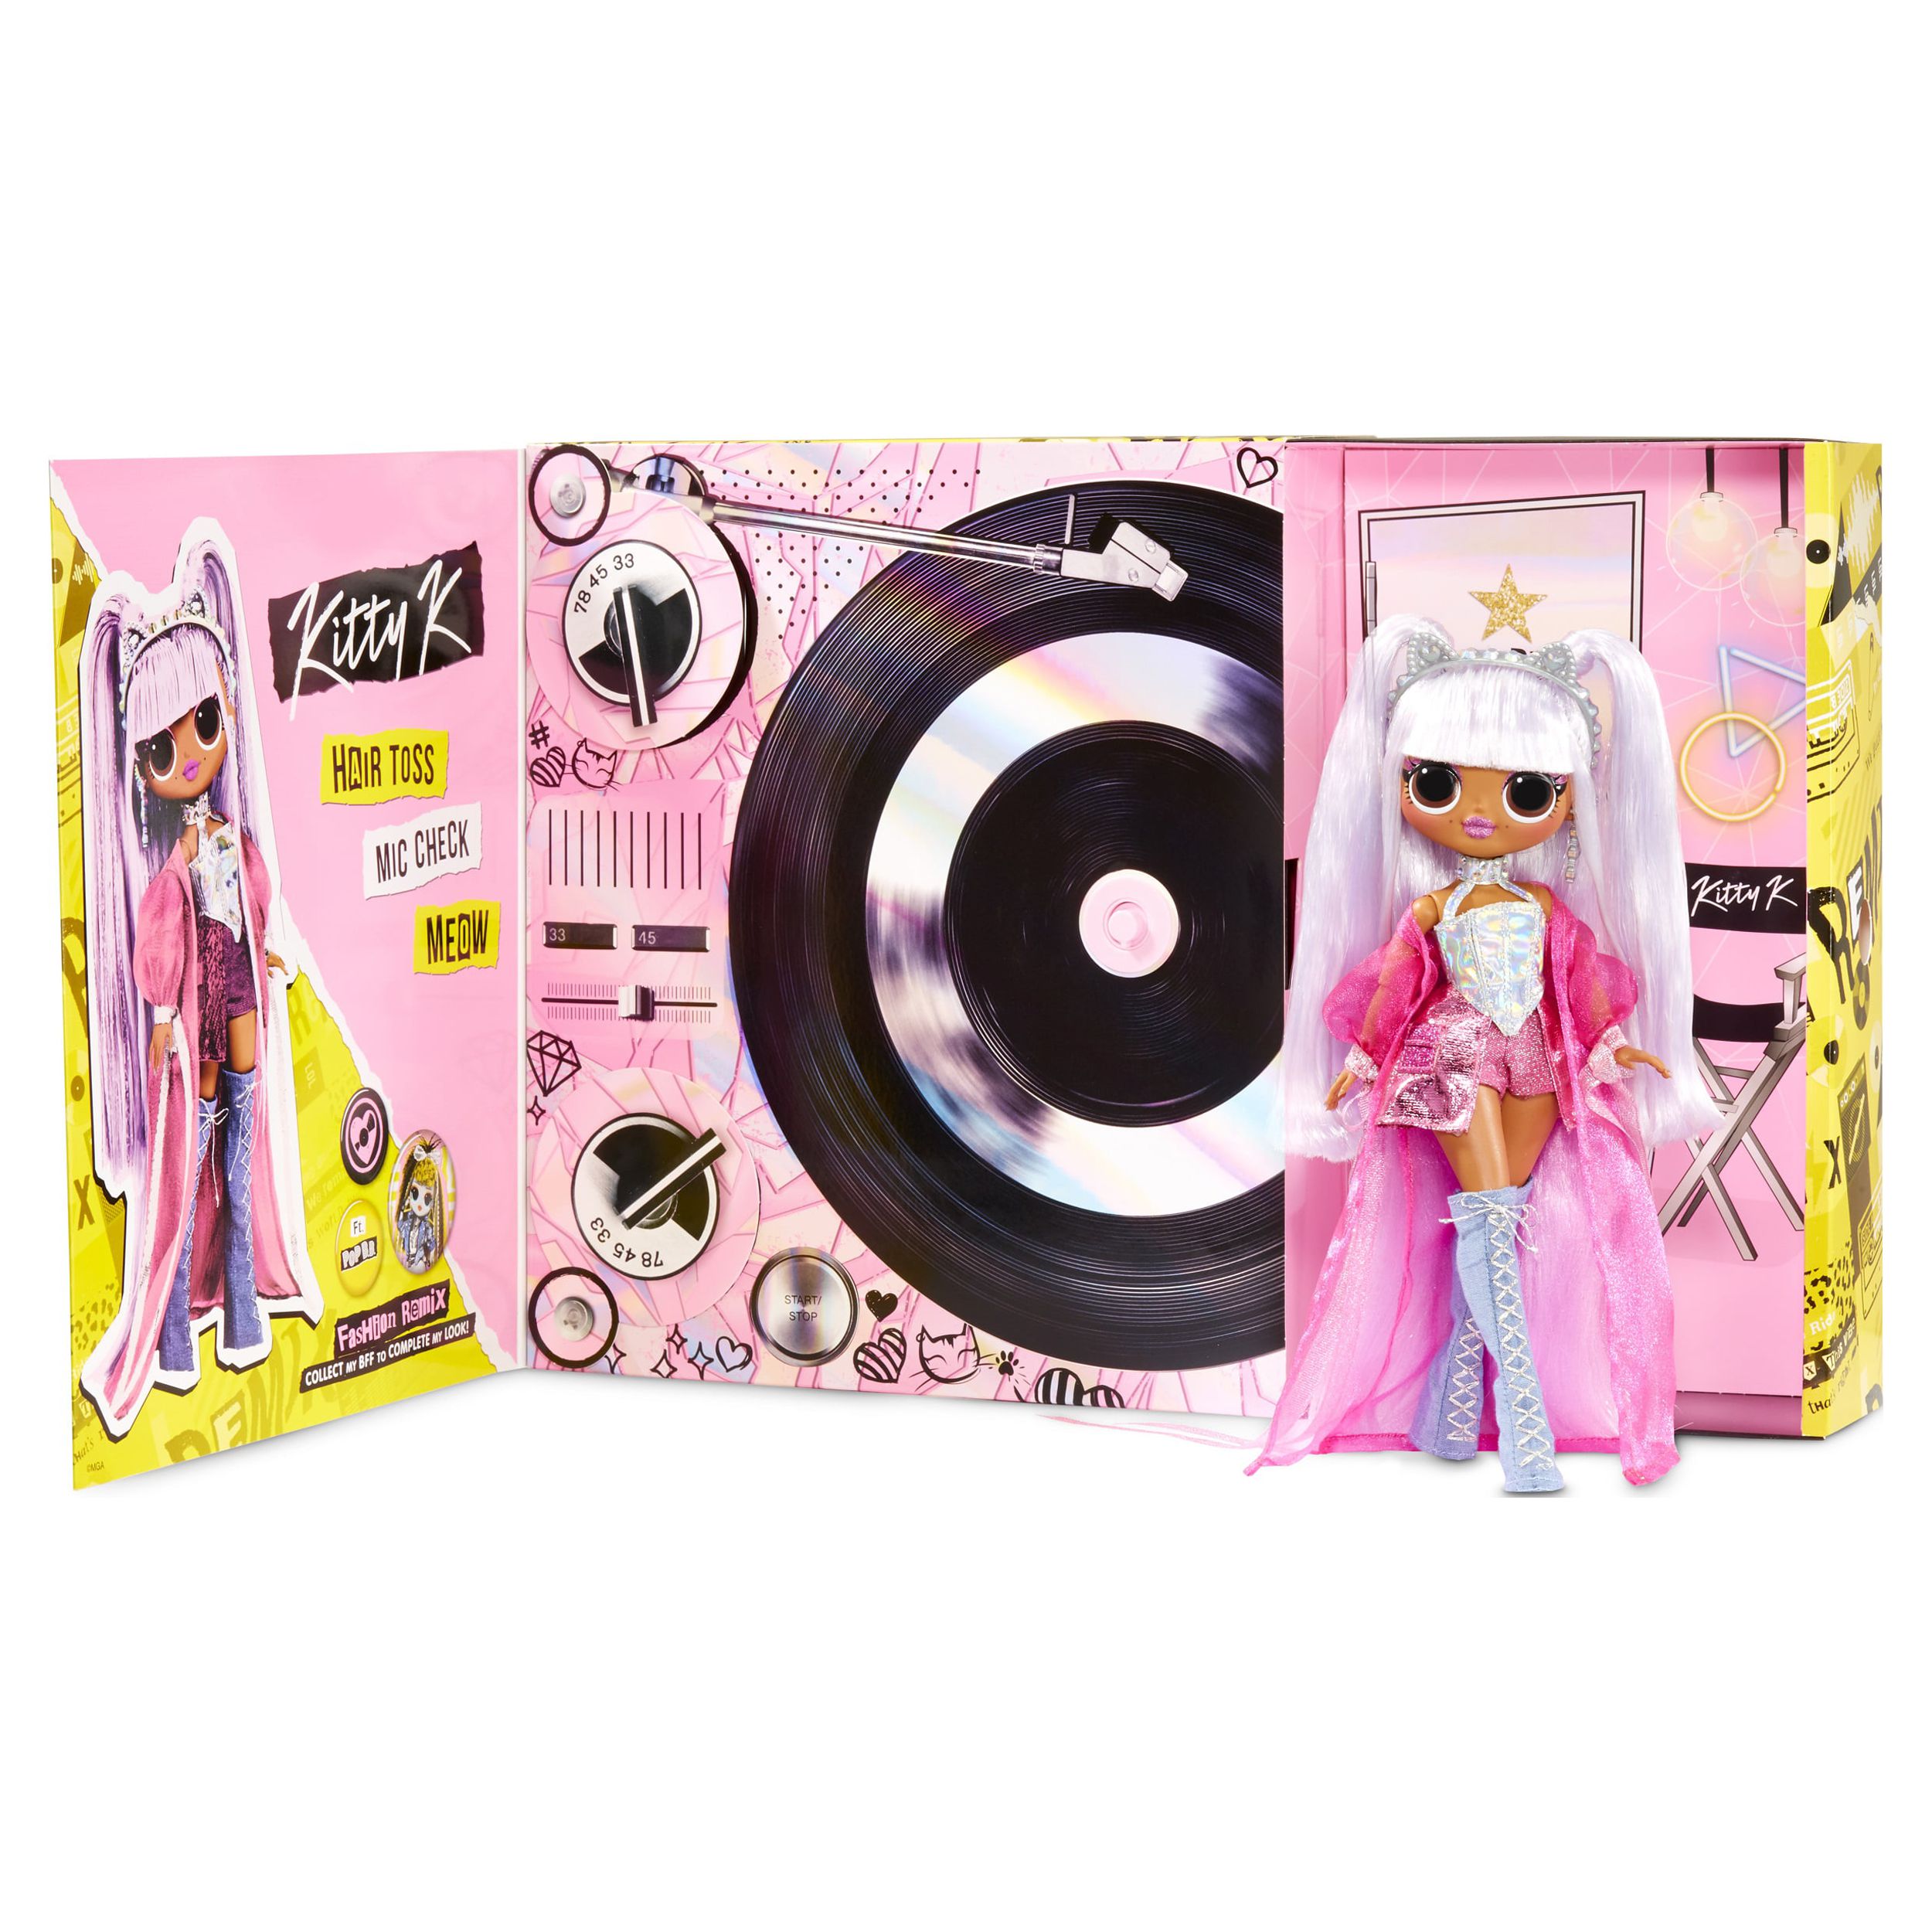 LOL Surprise OMG Remix Kitty K Fashion Doll – with 25 Surprises Including Extra Outfit, Shoes, Hair Brush, Doll Stand, Lyric Magazine, and Record Player Package that Plays Music - For Girls Ages 4+ - image 5 of 8